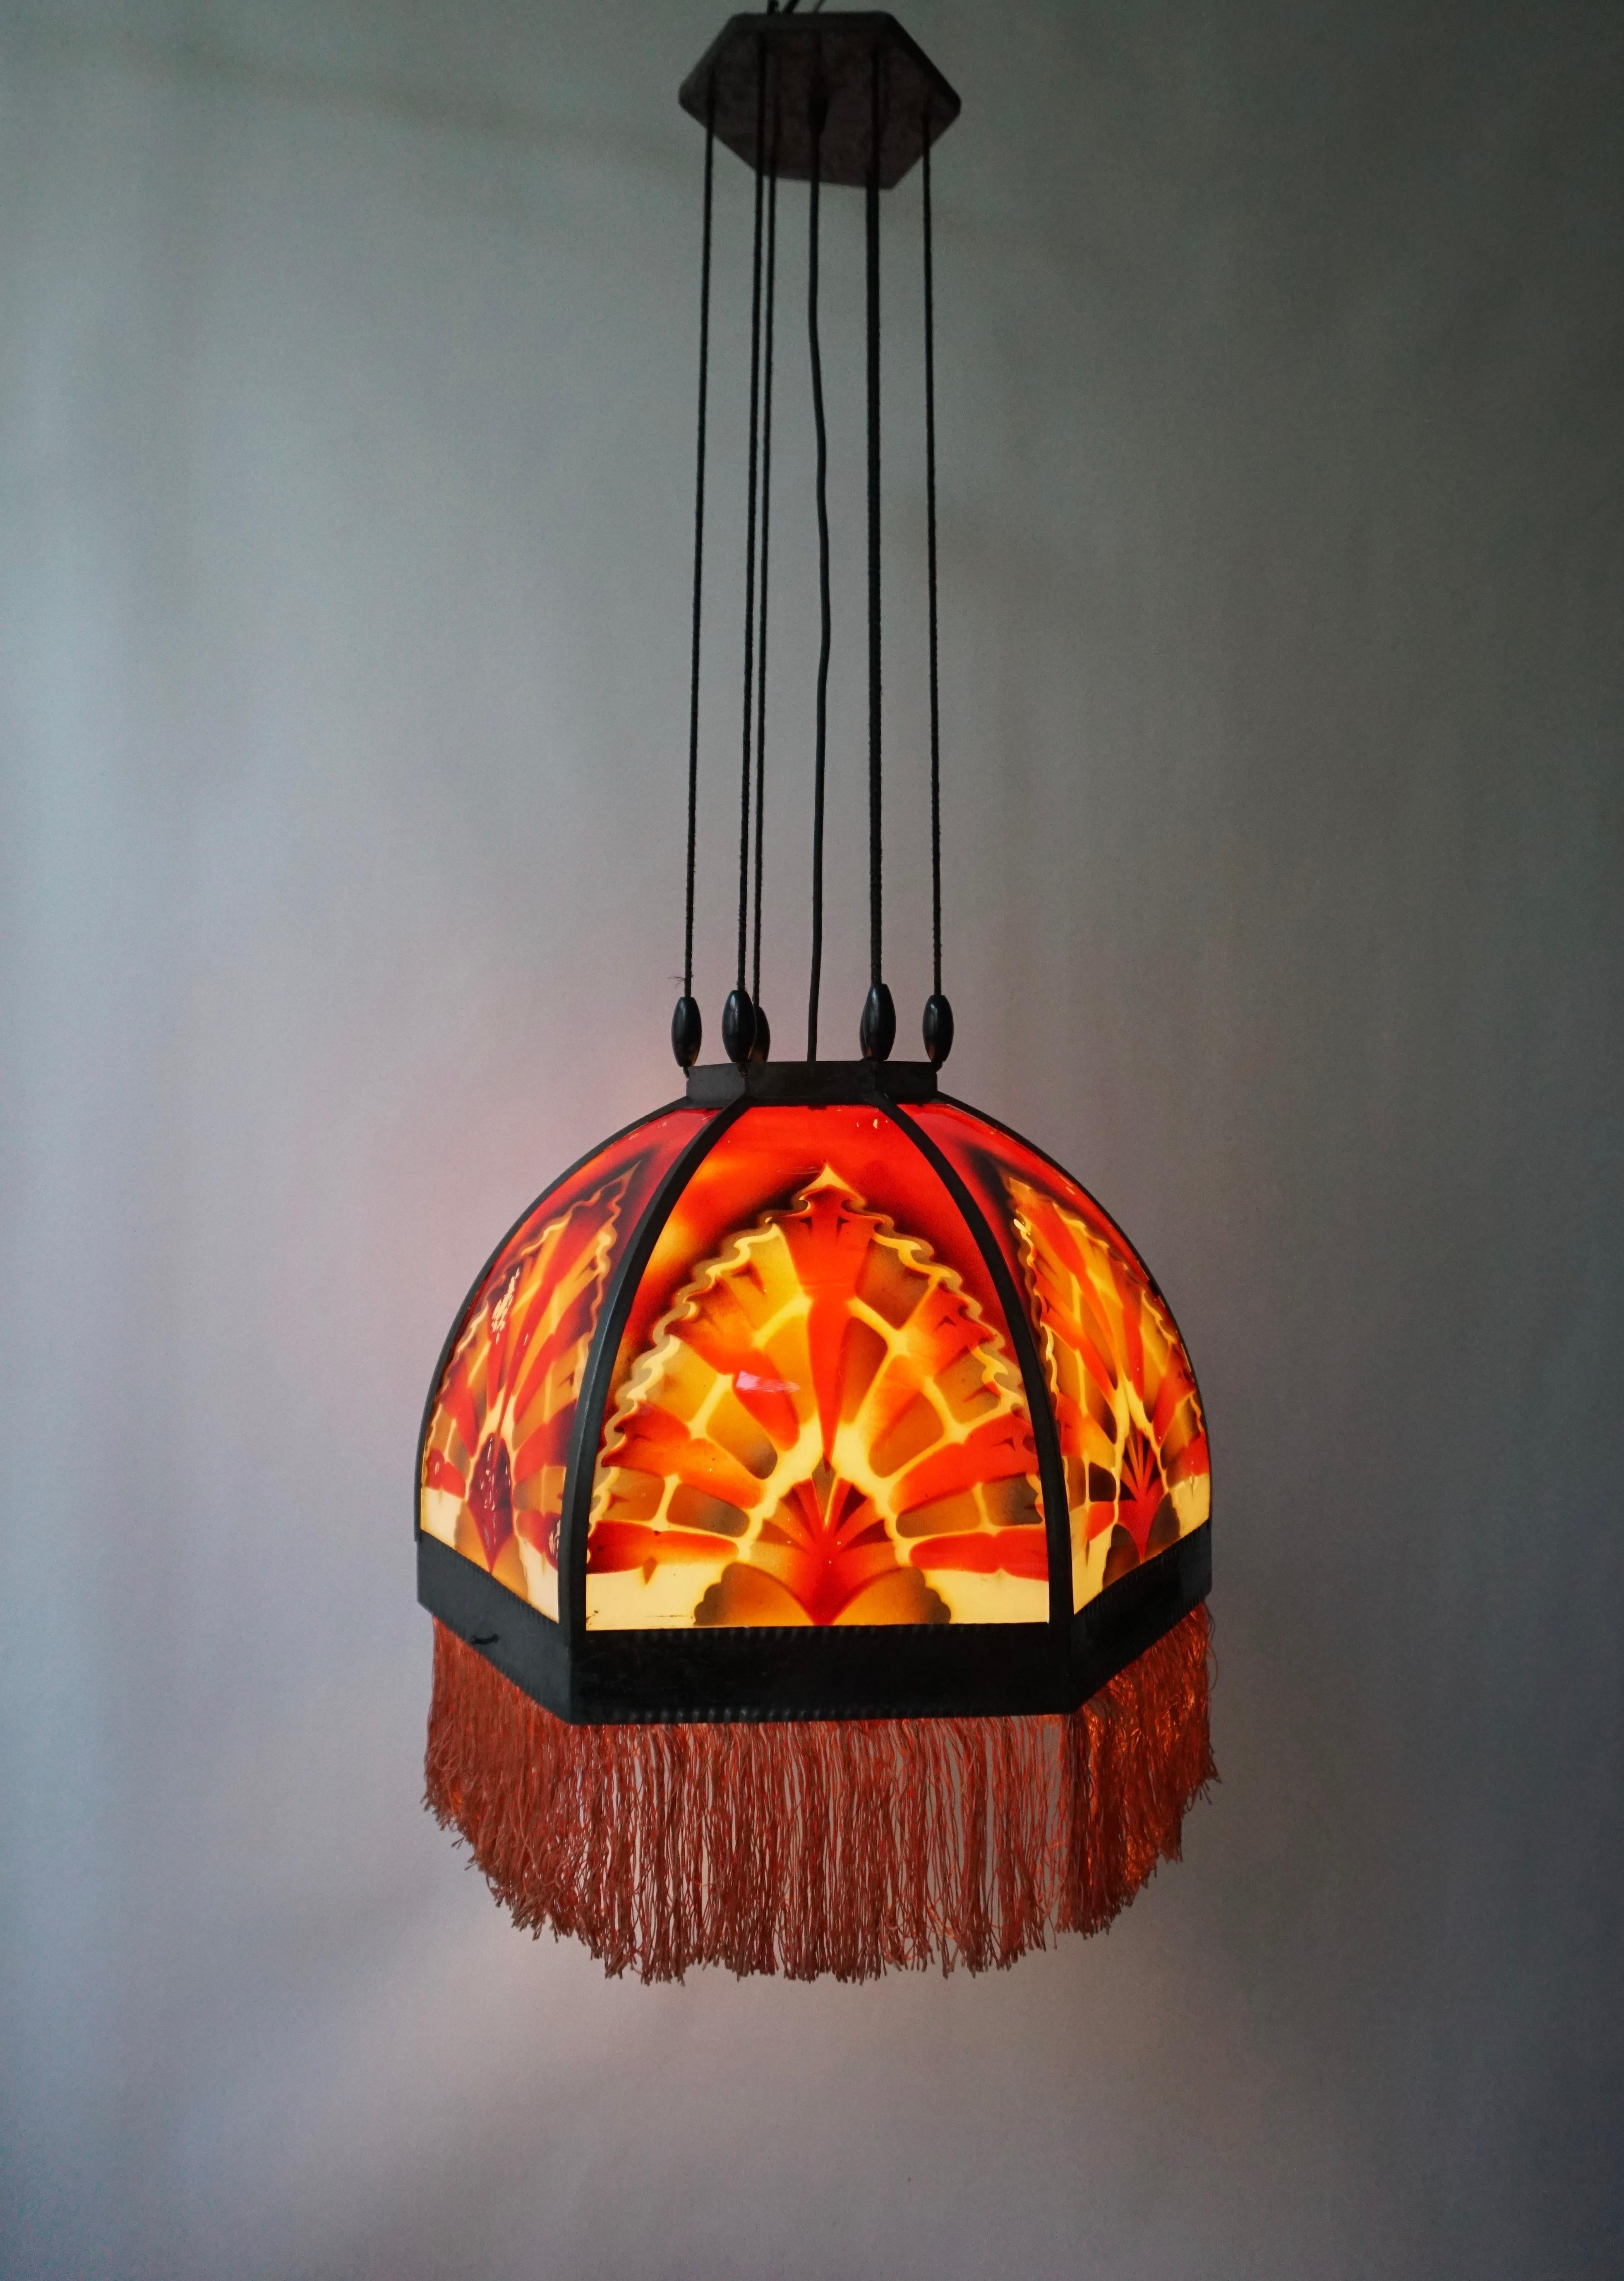 Beautiful ‘Amsterdamse School’ glass Art Deco pedant light, manufactured in the 1920s in the Netherlands. Very subtle Dutch design pendant in hexagon shape featuring 6 glass panels and beautiful colored glasses in a brass armature, with a